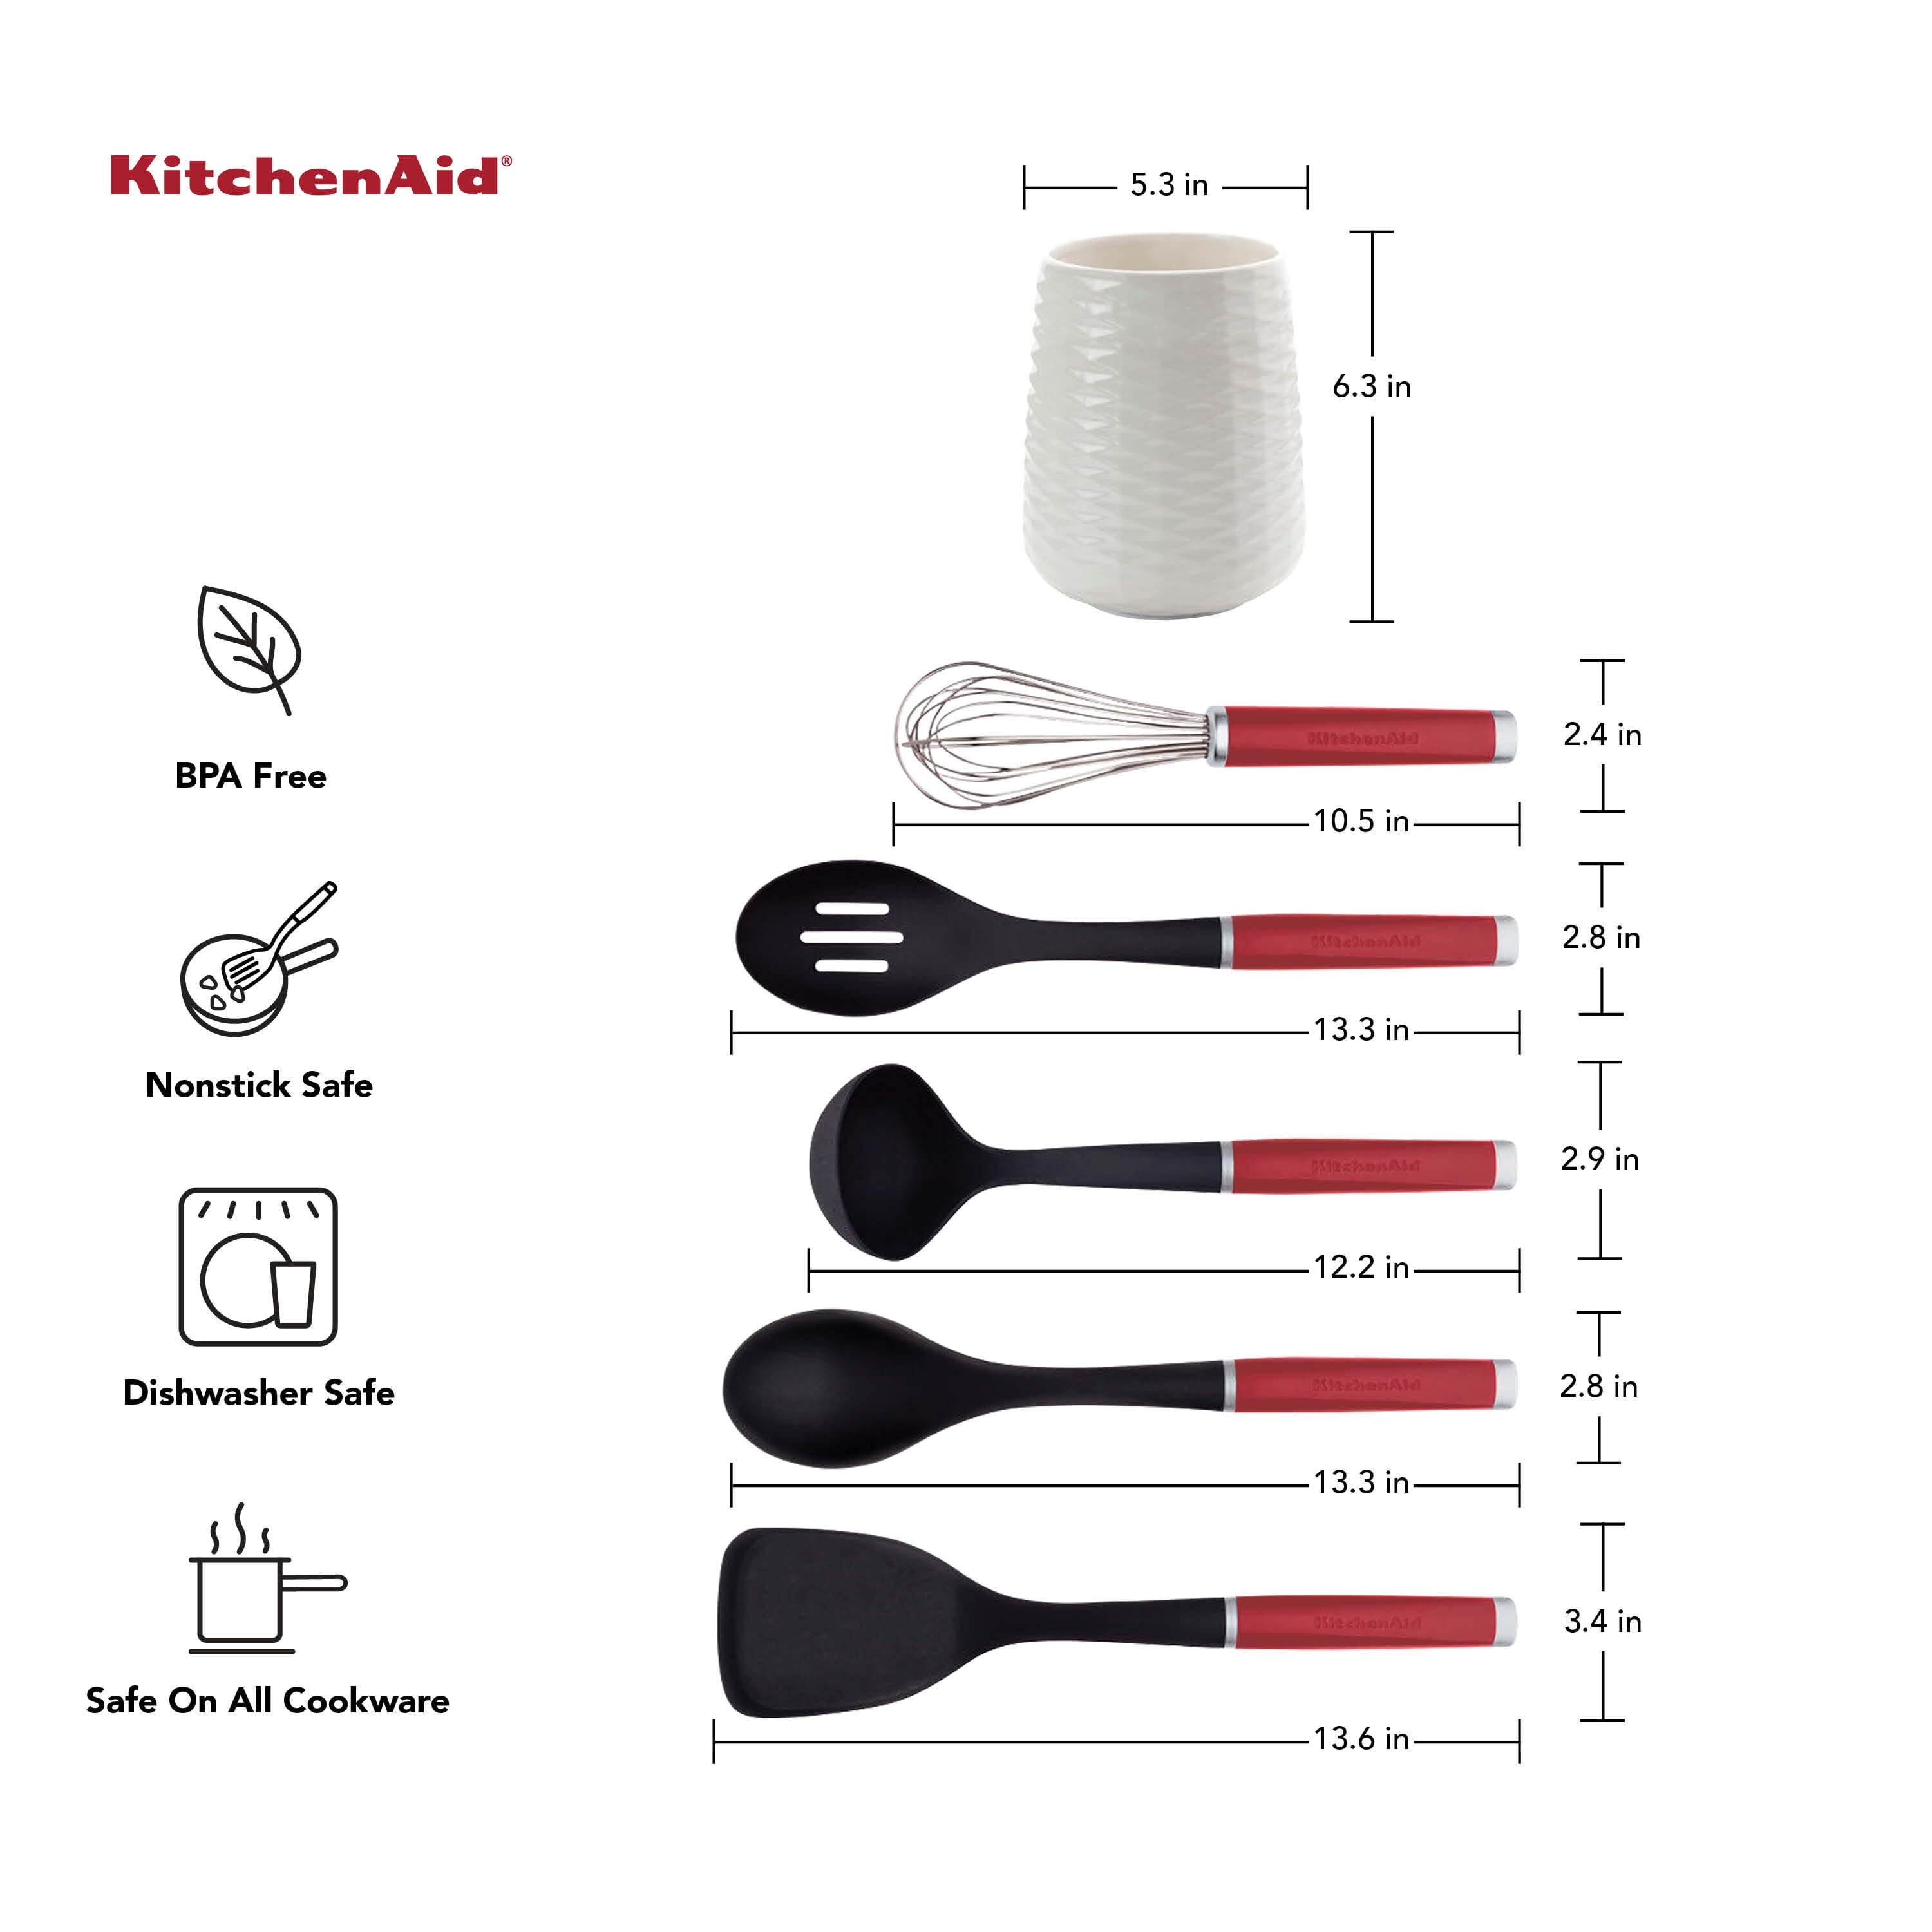 KitchenAid Cooks 6-piece Culinary Utensil Set (Red - Pack of 6)